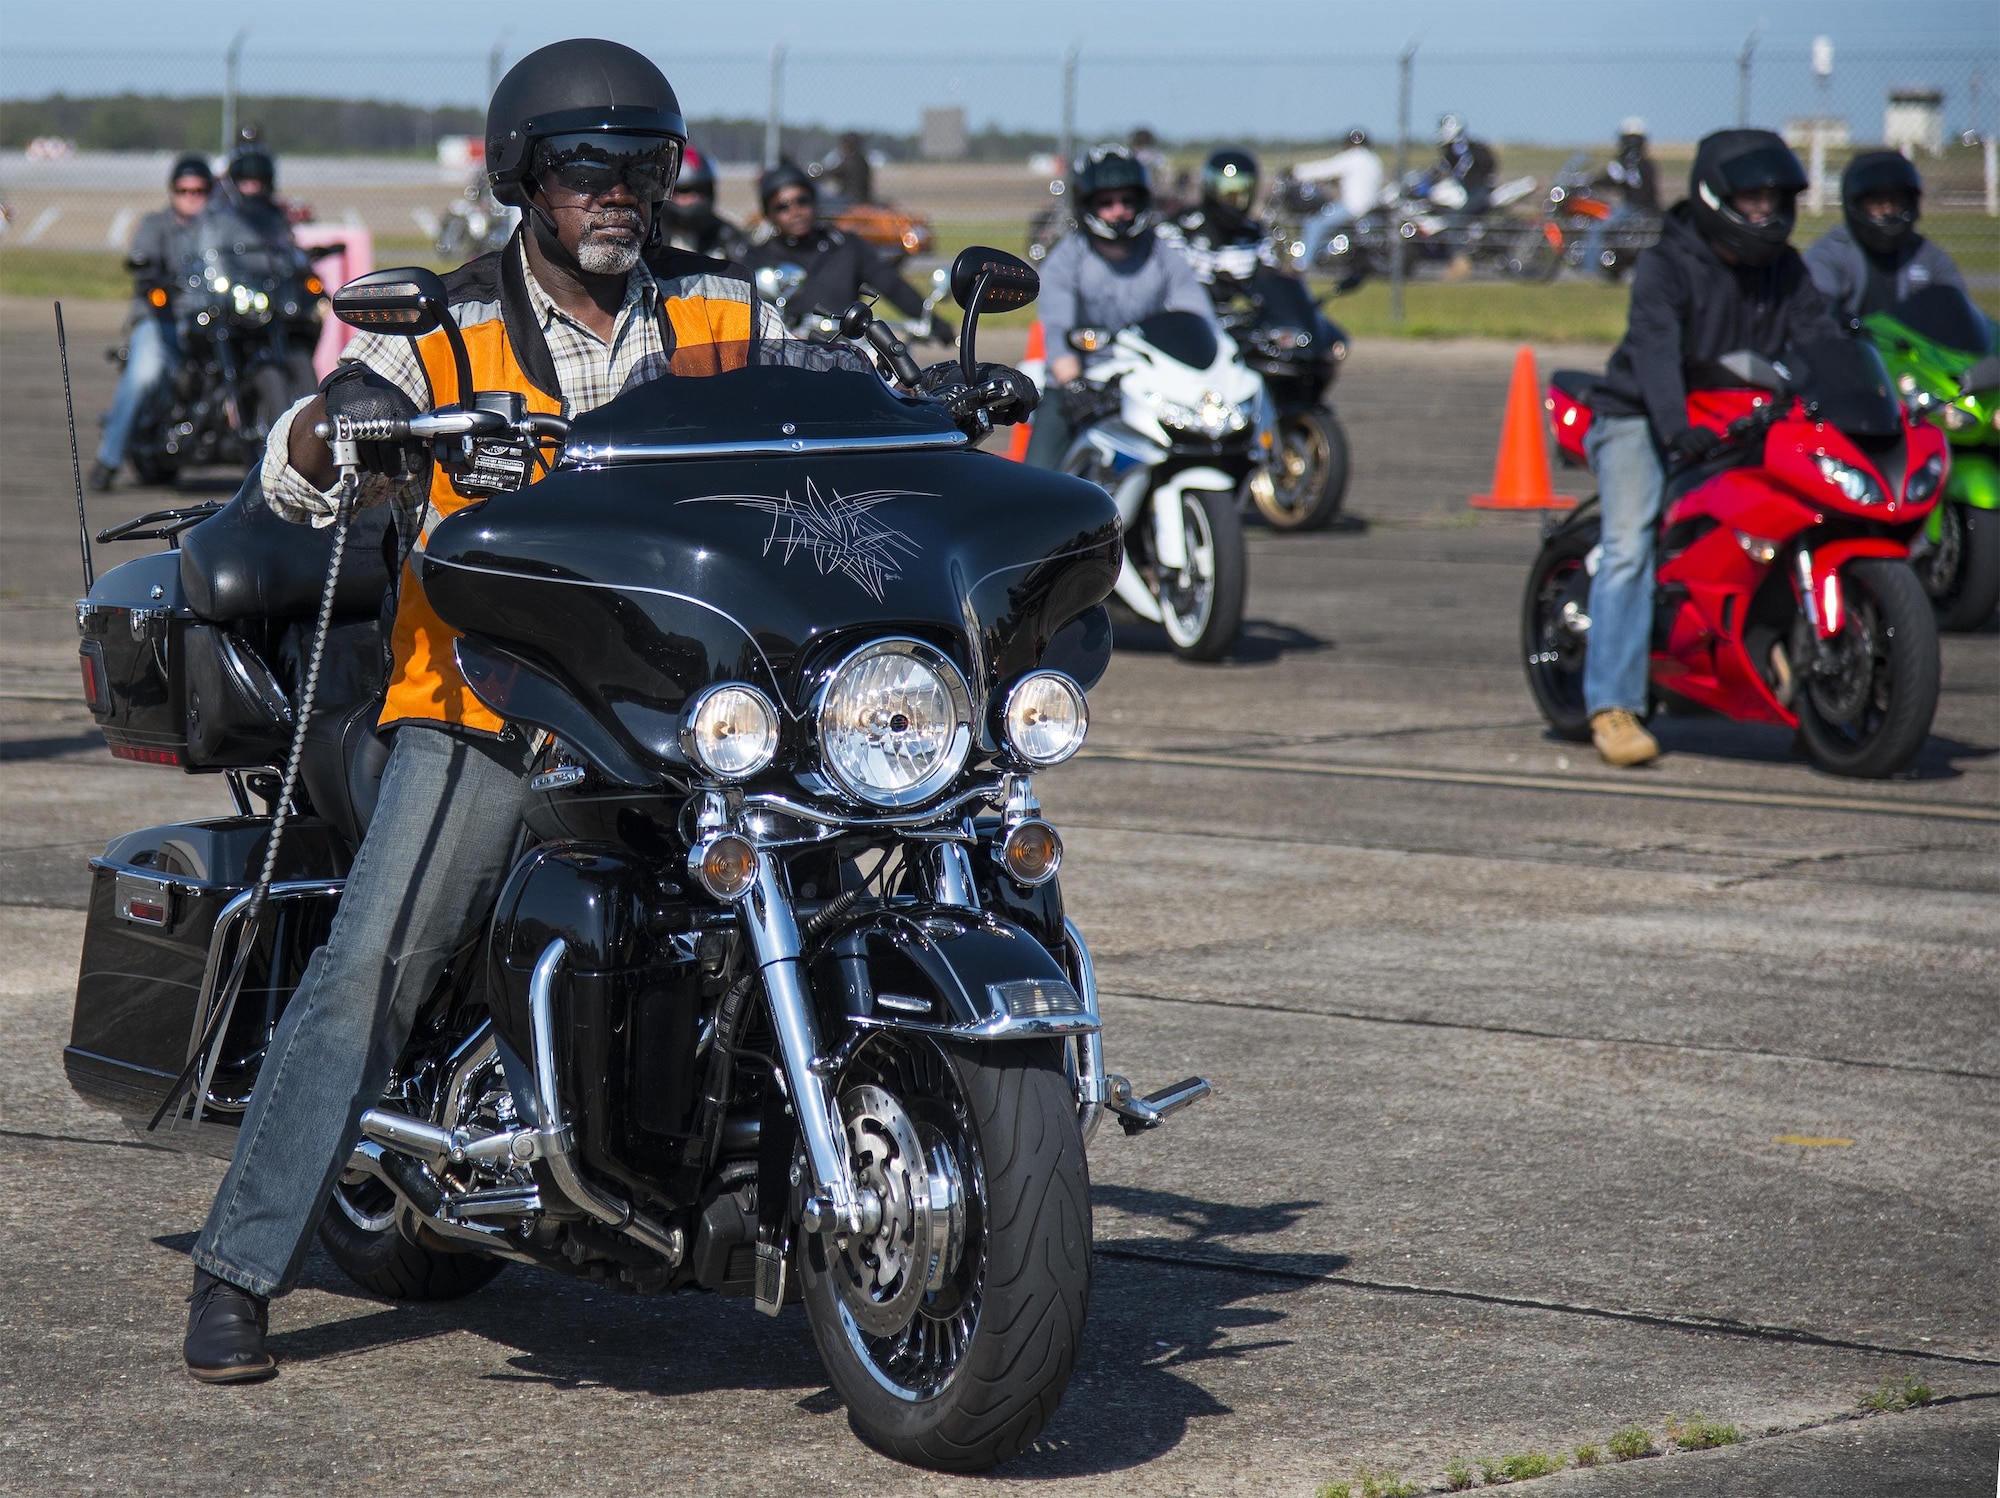 Bikers roll into the annual motorcycle safety rally at Eglin Air Force Base, Fla., April 14.  More than 500 motorcyclists came out for the event that meets the annual safety briefing requirement for base riders.  (U.S. Air Force photo/Samuel King Jr.)